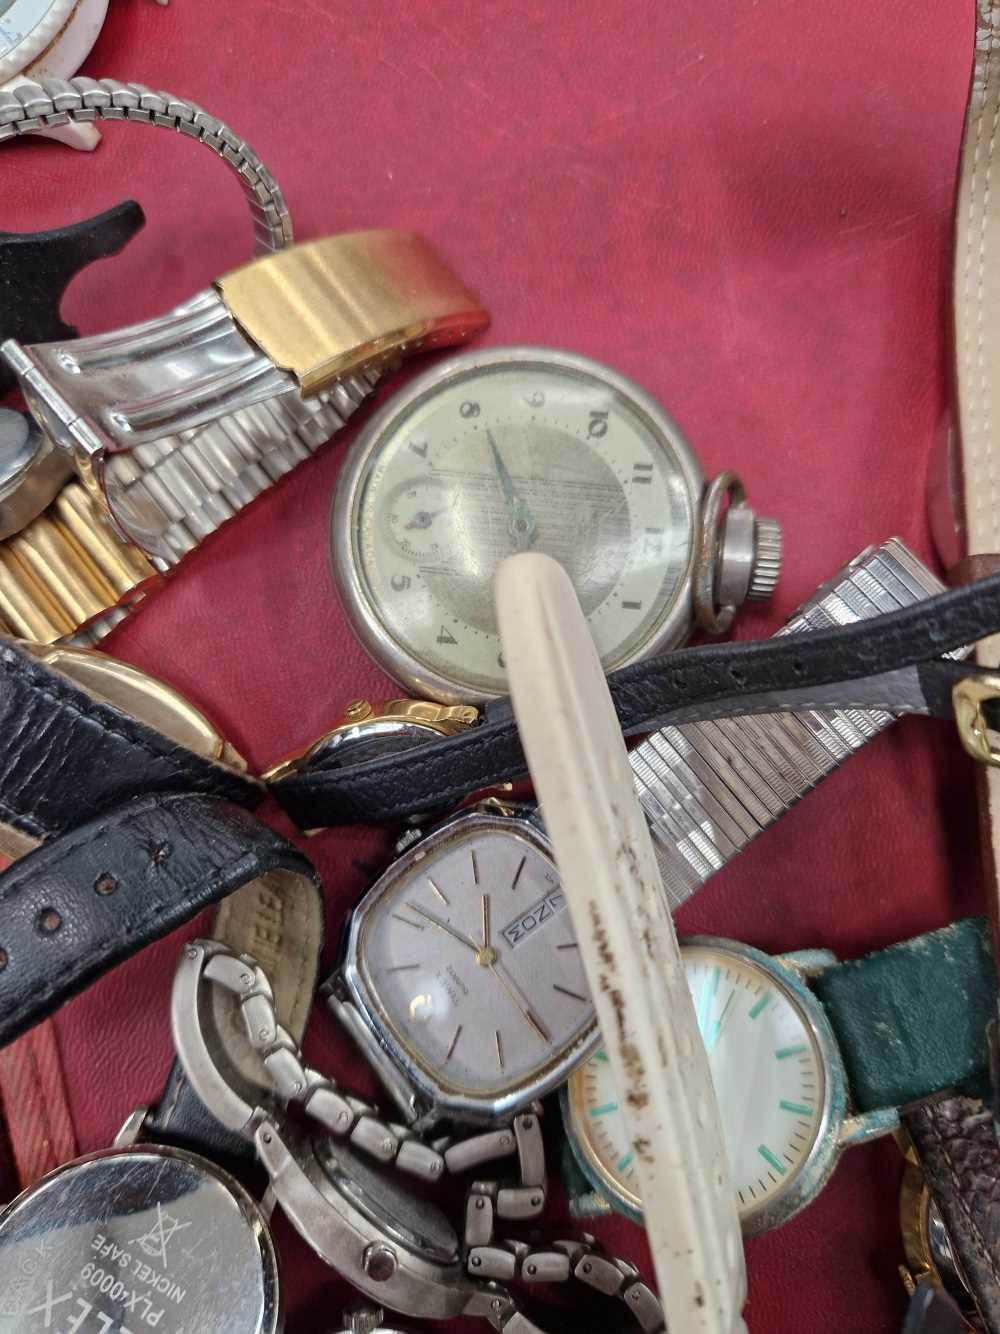 A collection of various wrist watches to include Everite Junior, Casio, Rotary, Seiko, Kred, - Image 3 of 4